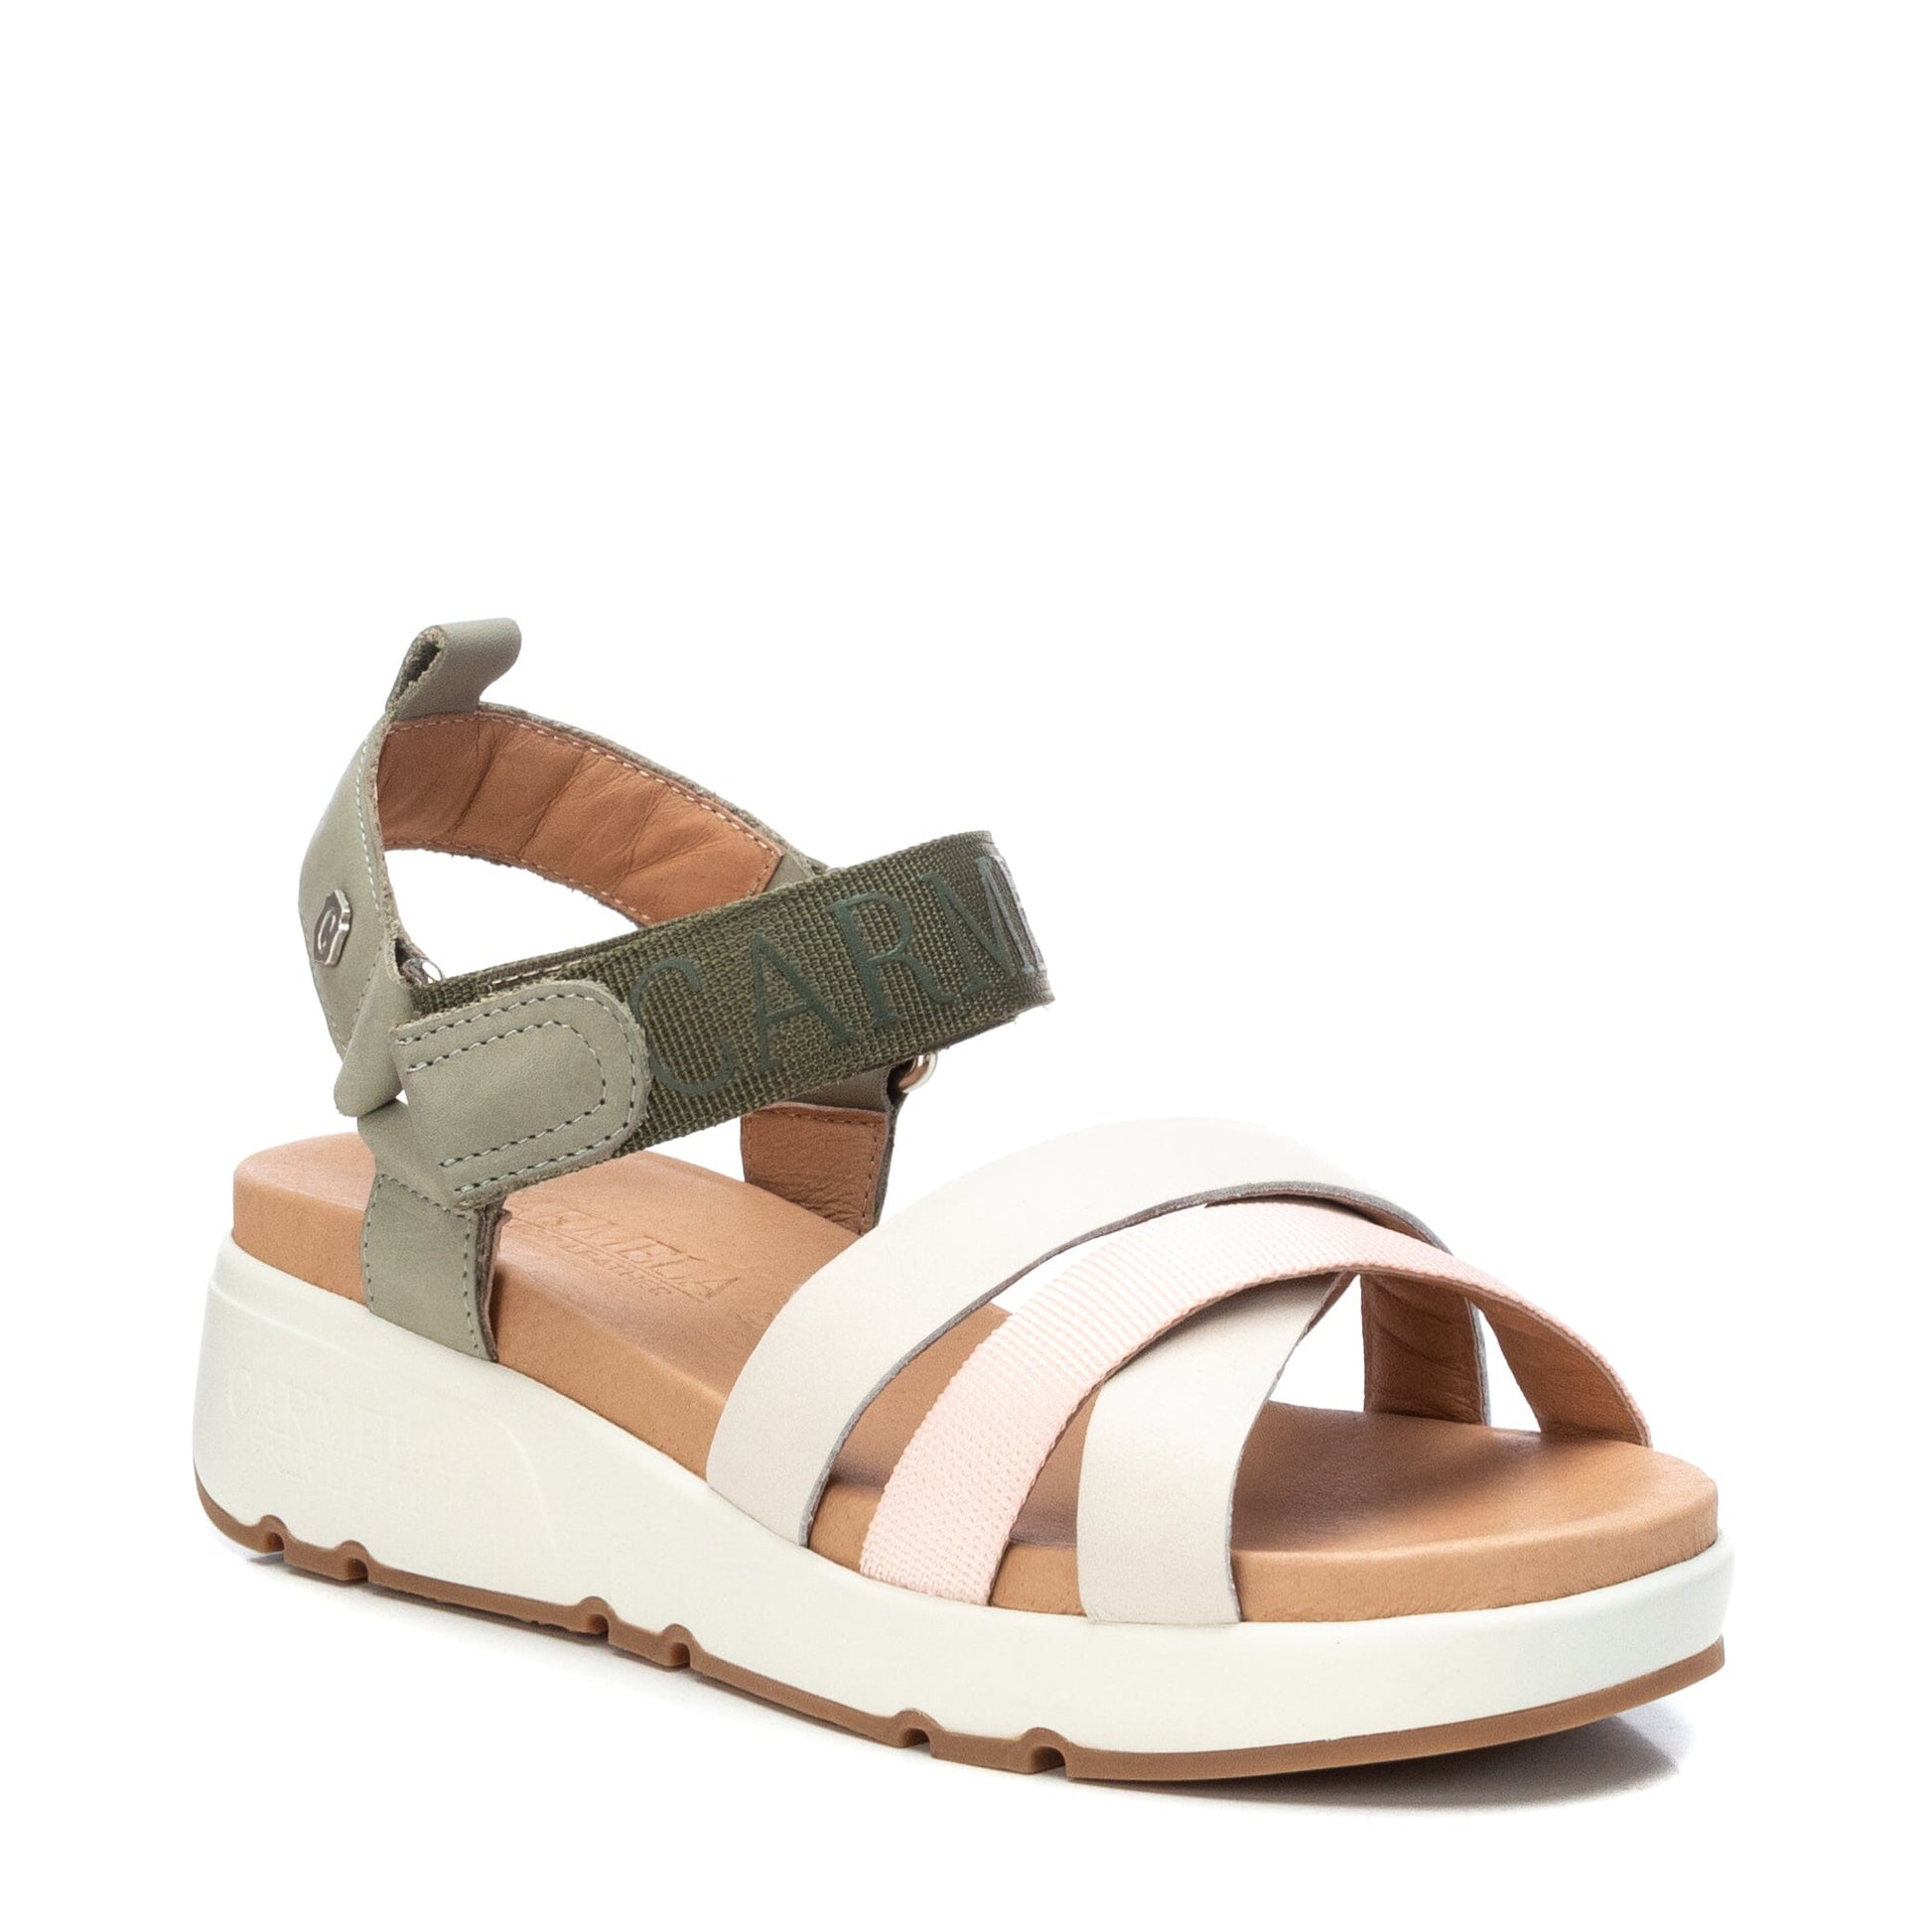 68468 Spanish leather sandals in sport deluxe style in Khaki, white sandals Sam Star Shoes Khaki/White 38 (5) 